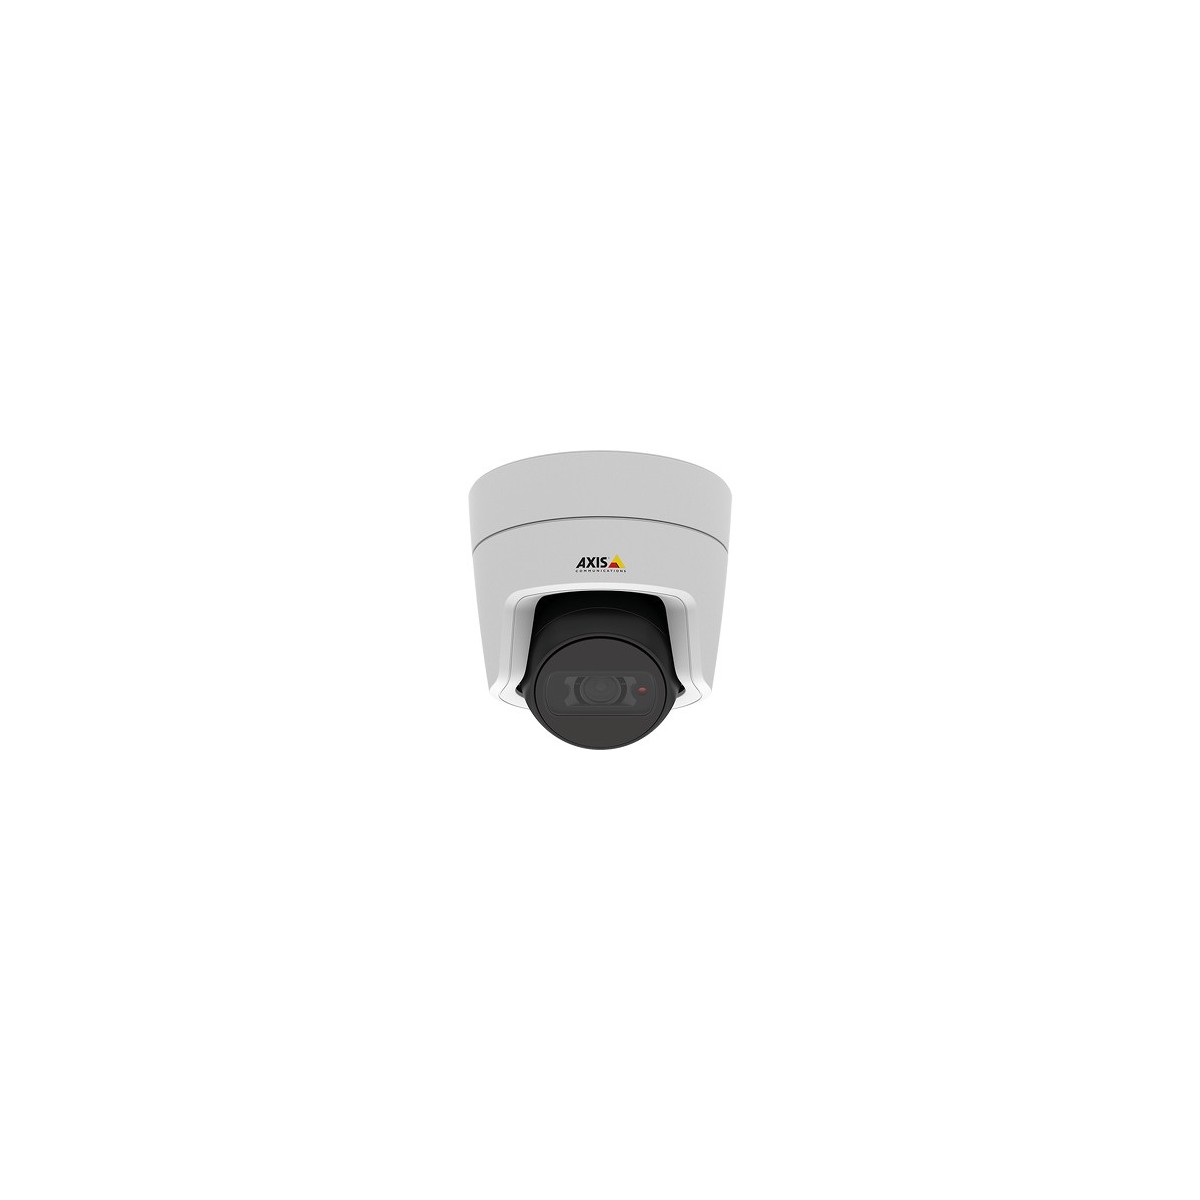 Axis M3104-L - IP security camera - Indoor  outdoor - Wired - Simplified Chinese - Traditional Chinese - German - English - Span